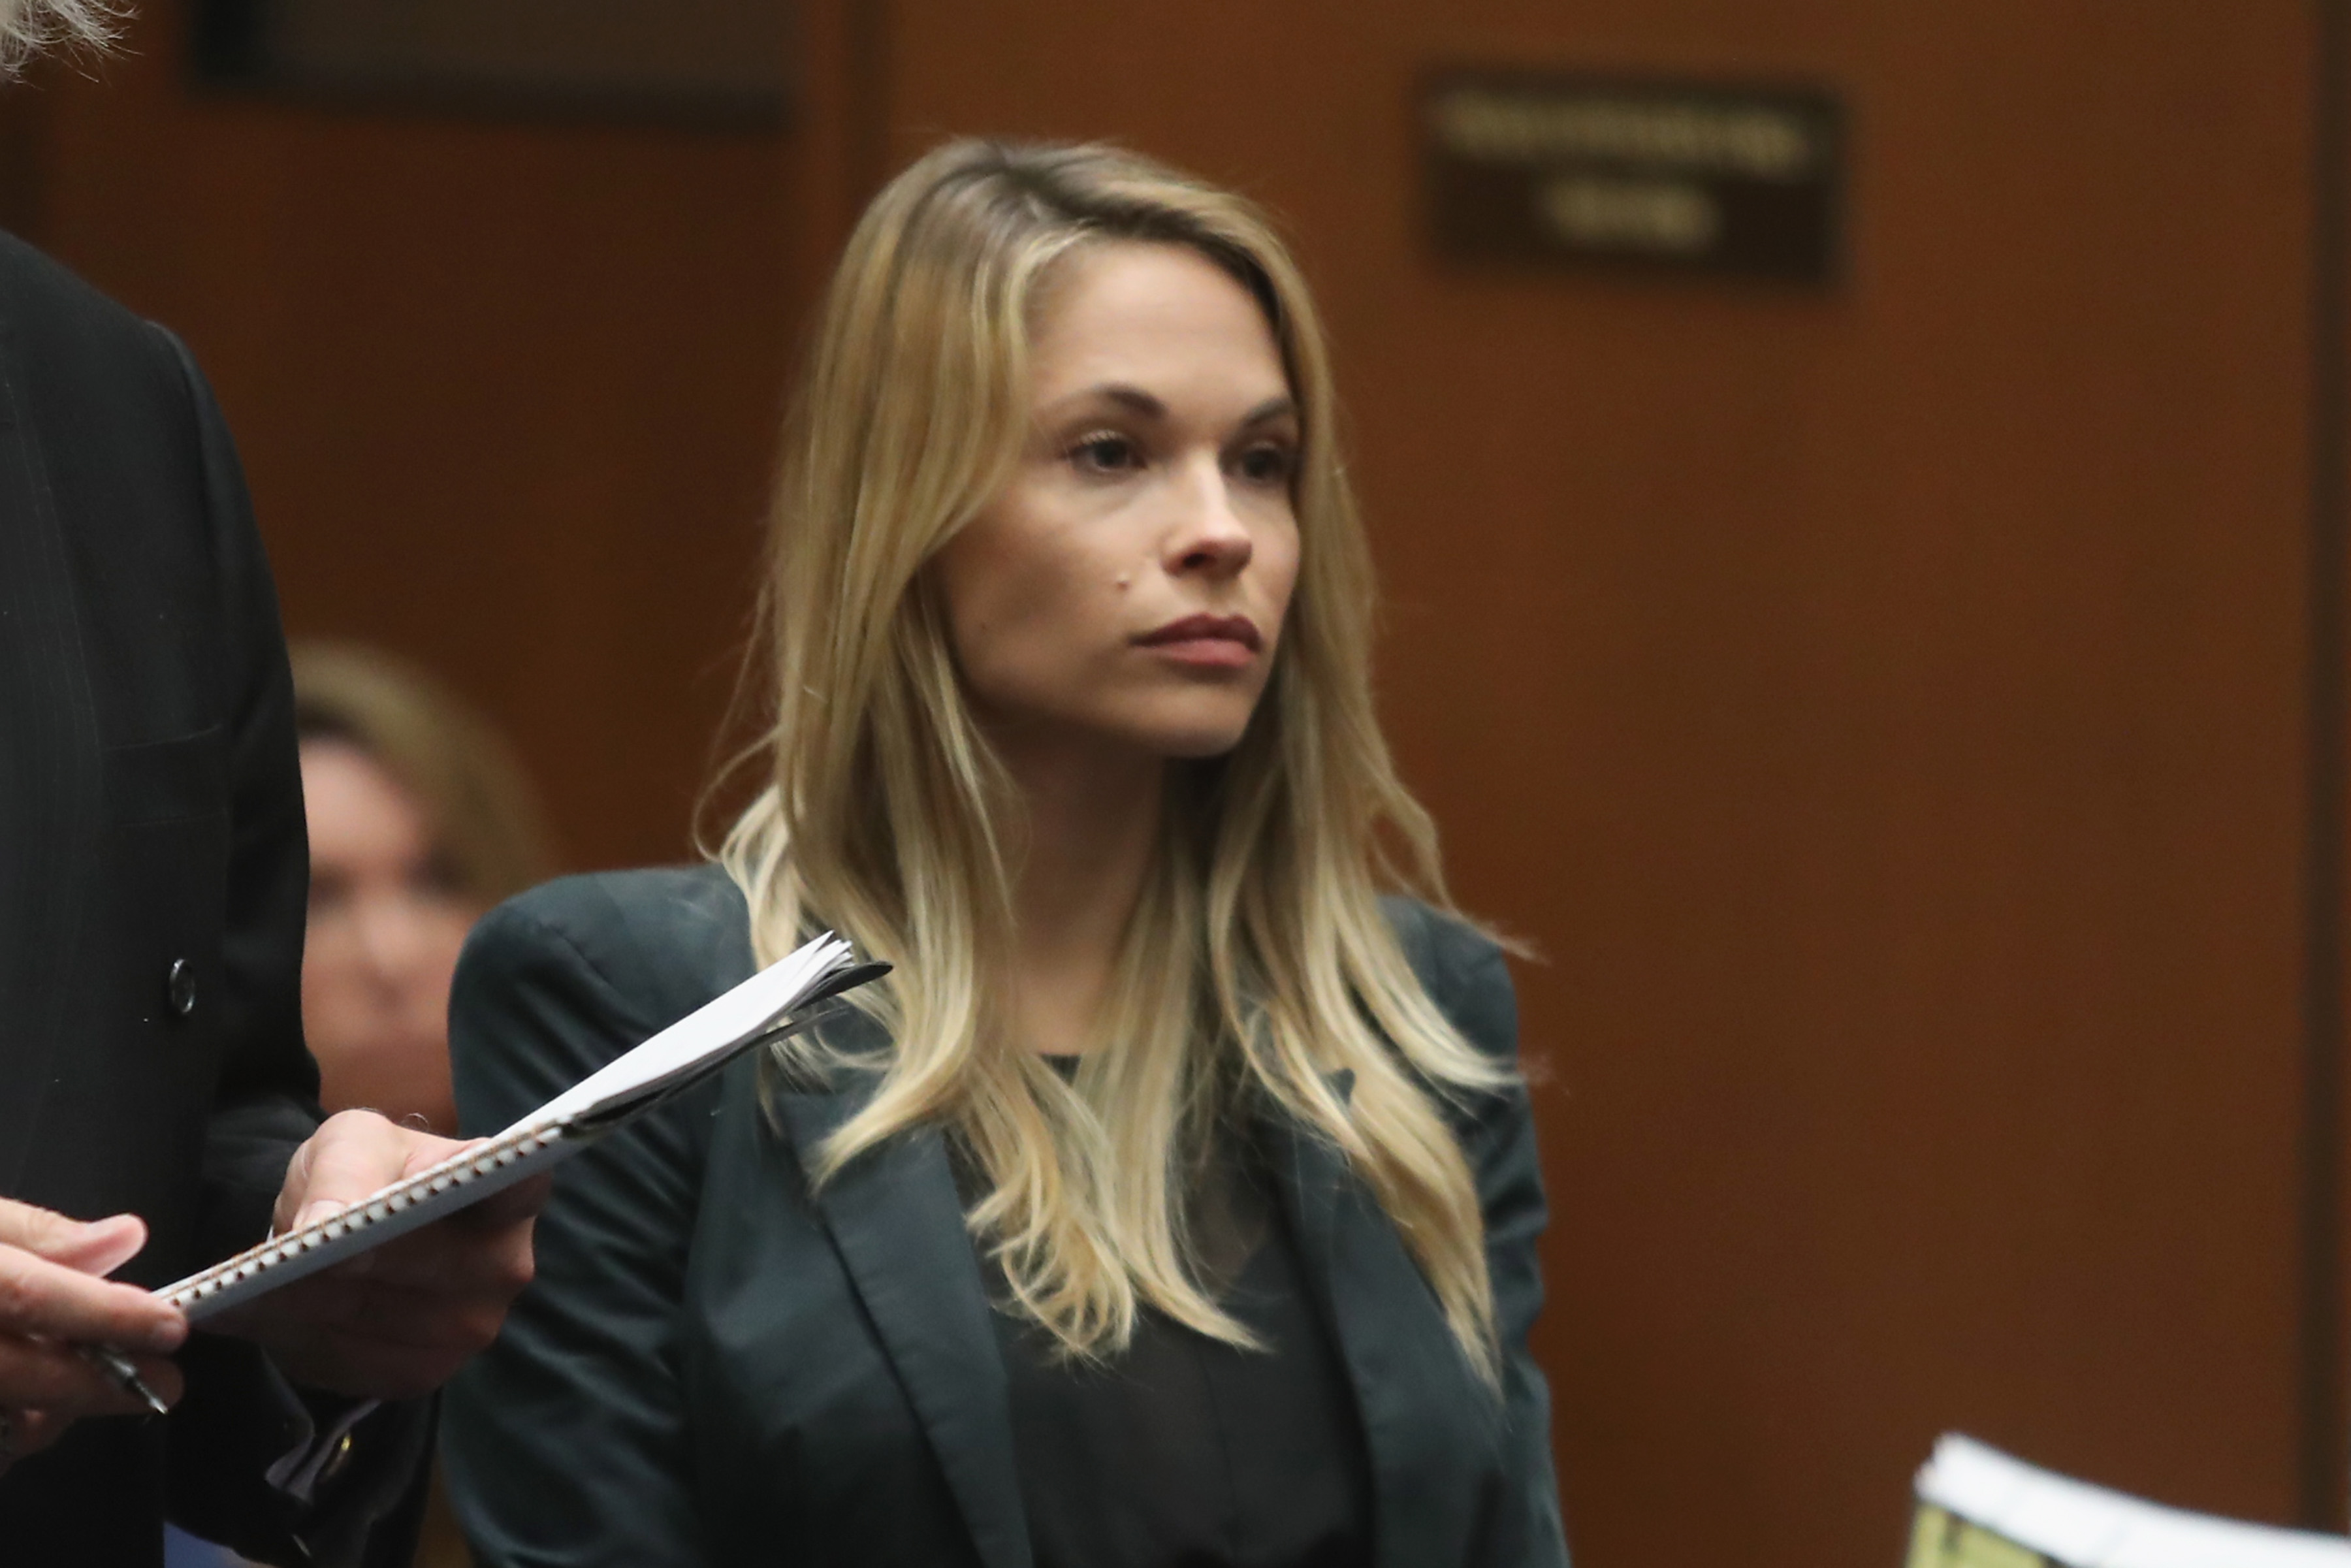 Model Dani Mathers stands during court proceedings for a hearing at Clara Shortridge Foltz Criminal Justice Center on May 24, 2017 in Los Angeles, California. (Frederick M. Brown—Getty Images)